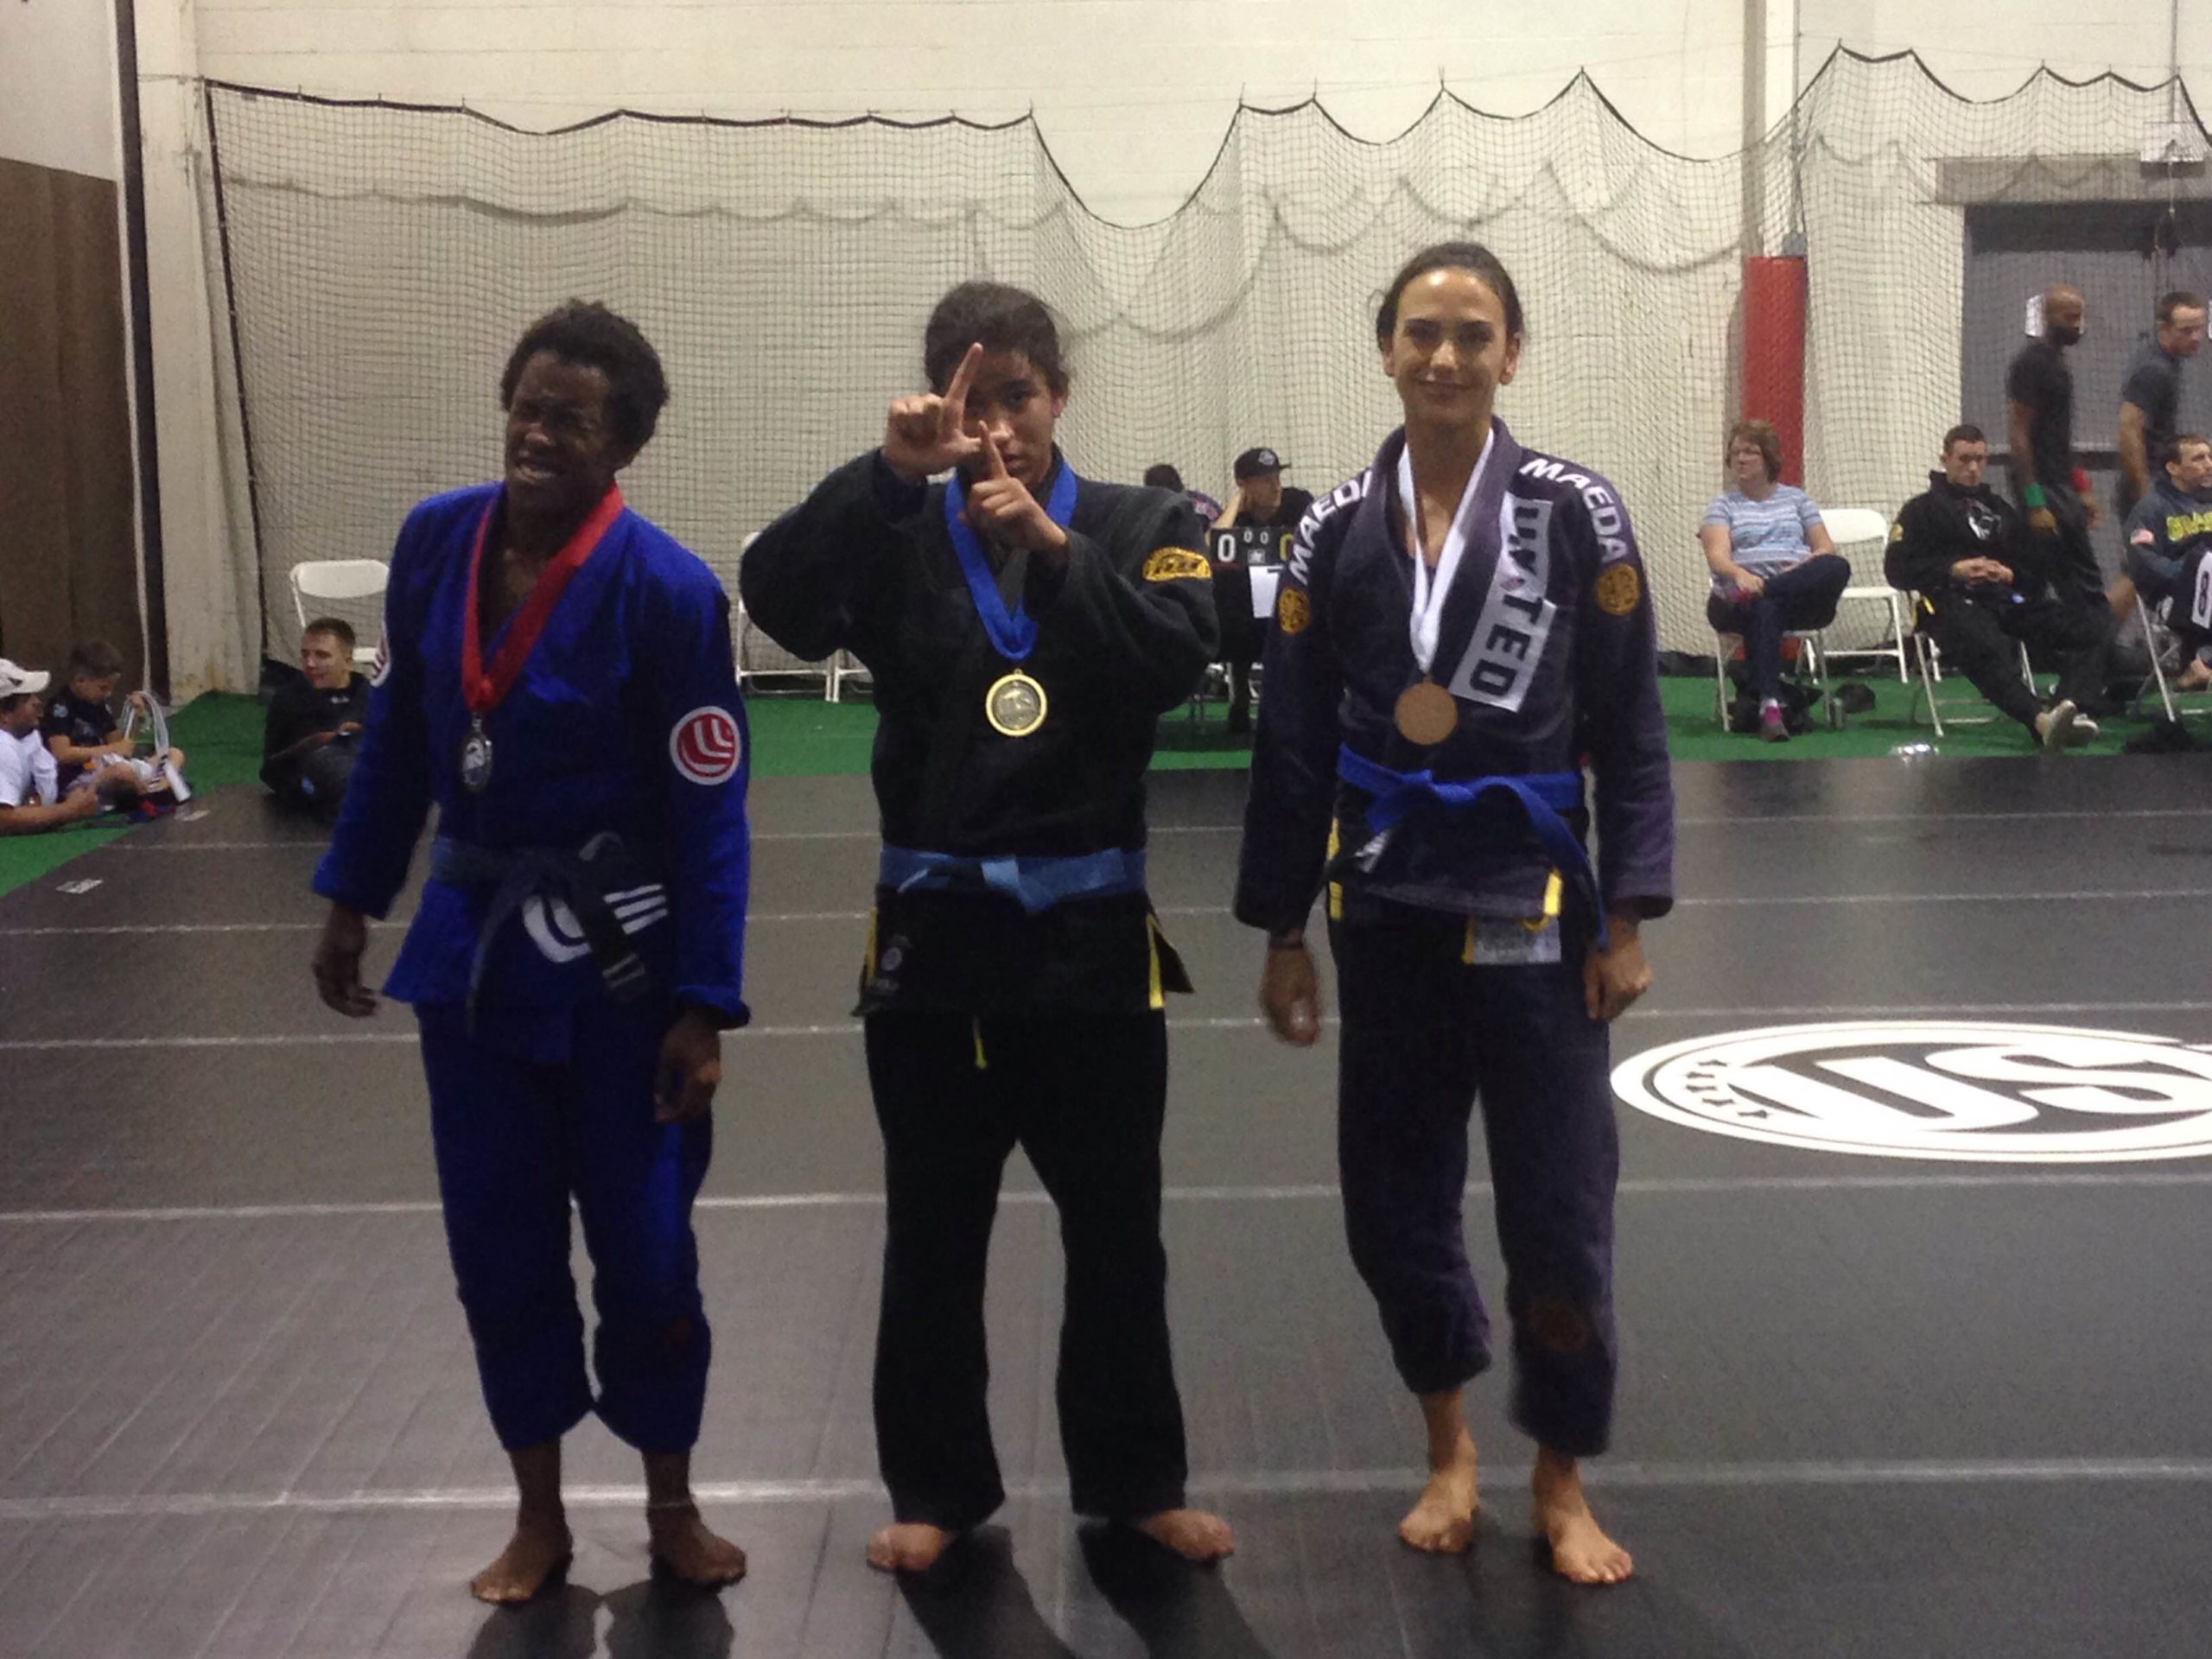 At age 17, Vannessa Griffin is one of our top up-and-coming competition grapplers.